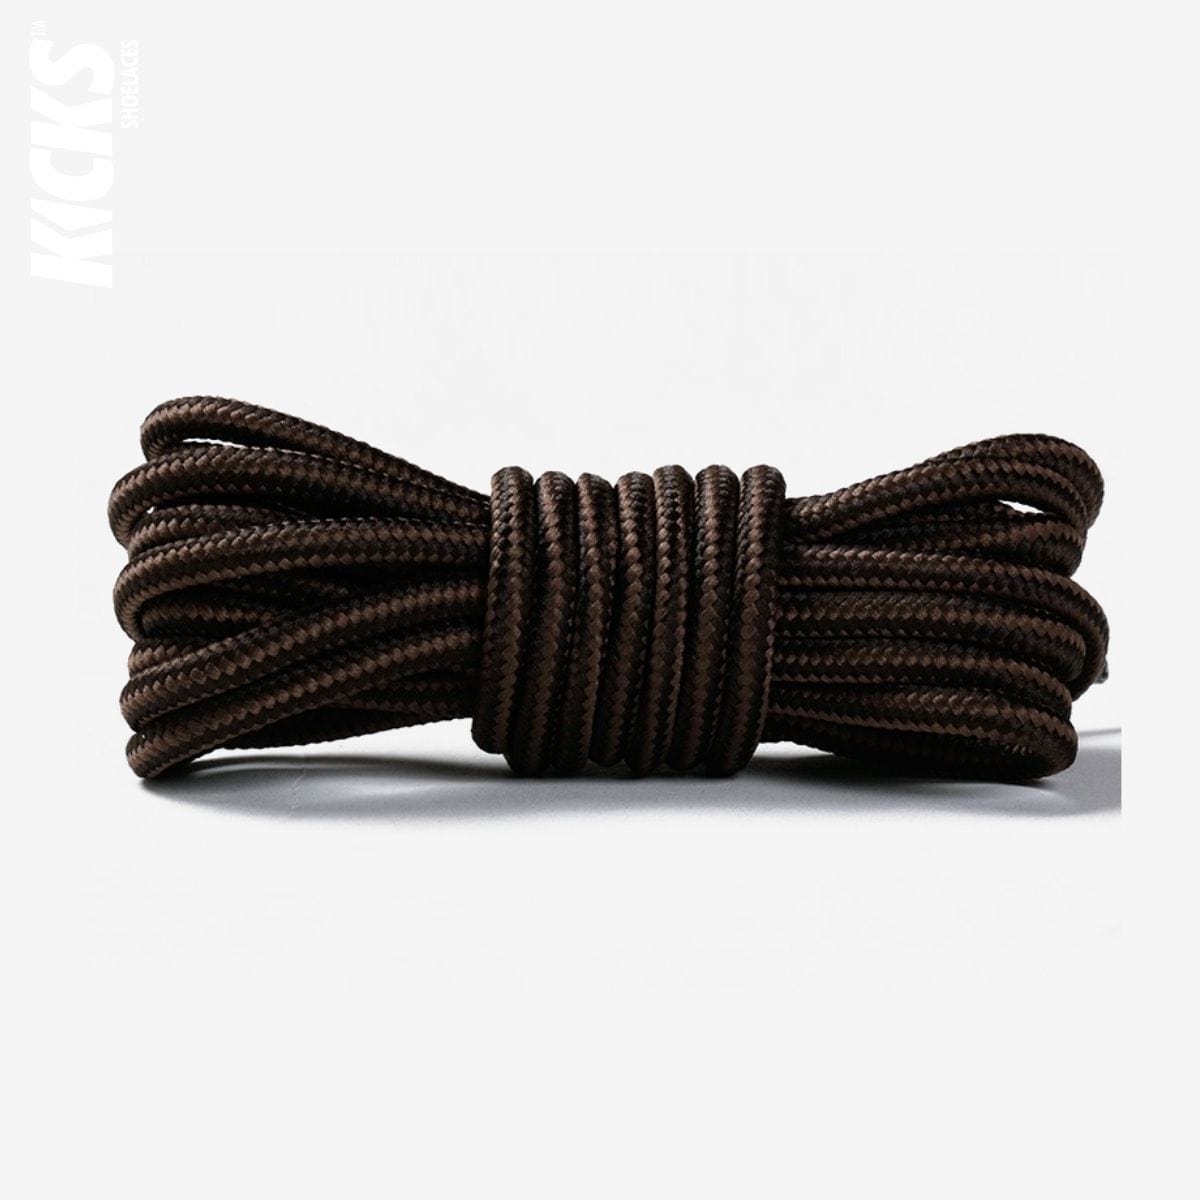 striped-two-color-shoelaces-for-casual-shoes-in-brown-and-dark-brown